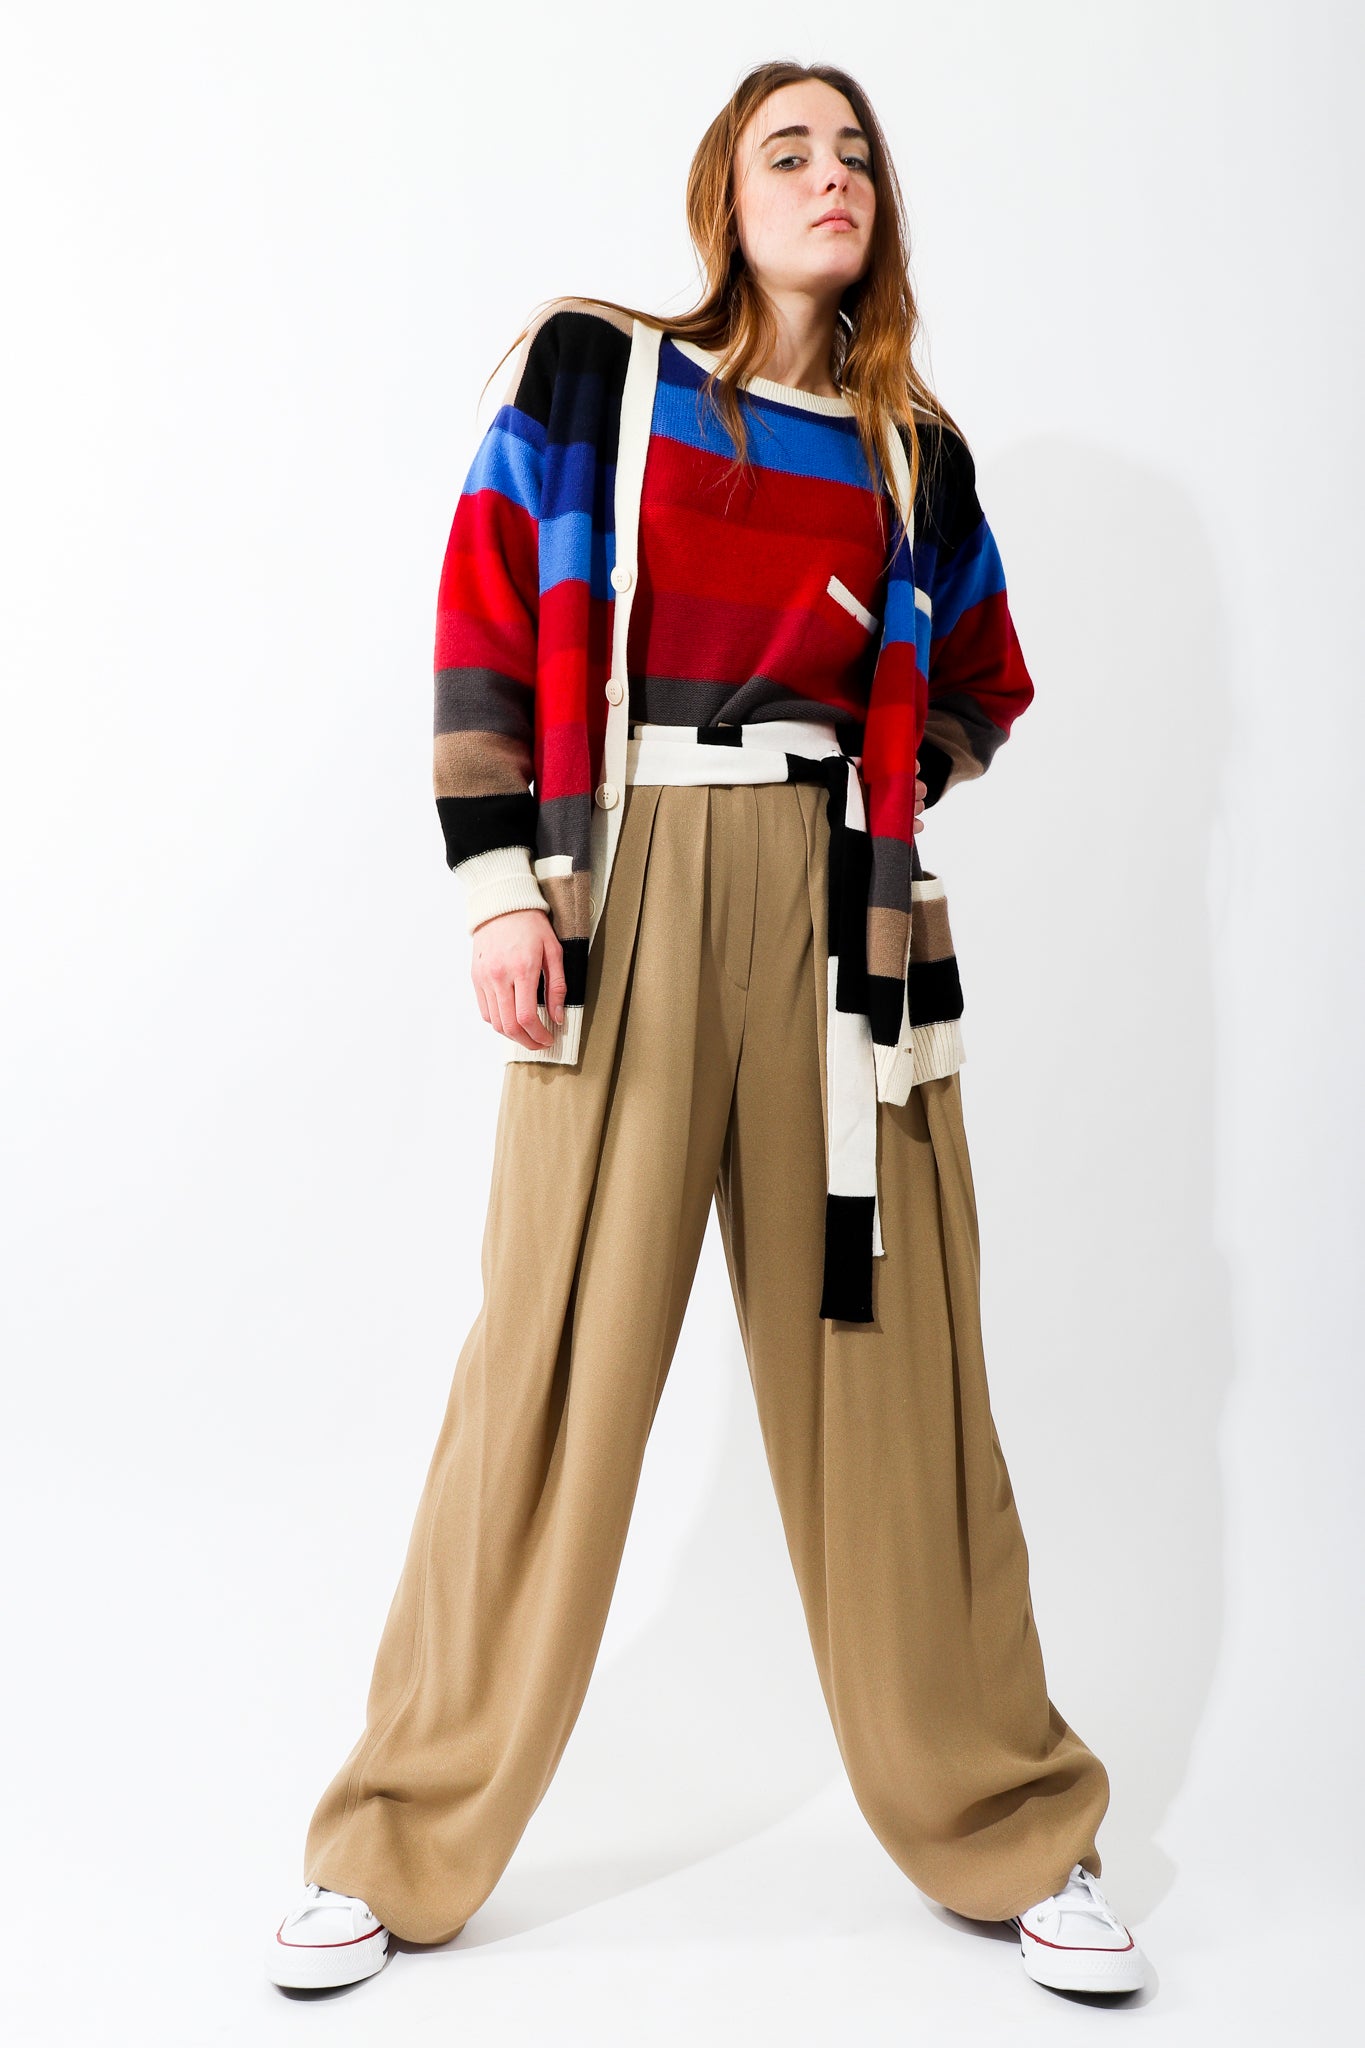 Recess Vintage Sonia Rykiel Rainbow Girl in colorful stripe sweaters and khaki trousers